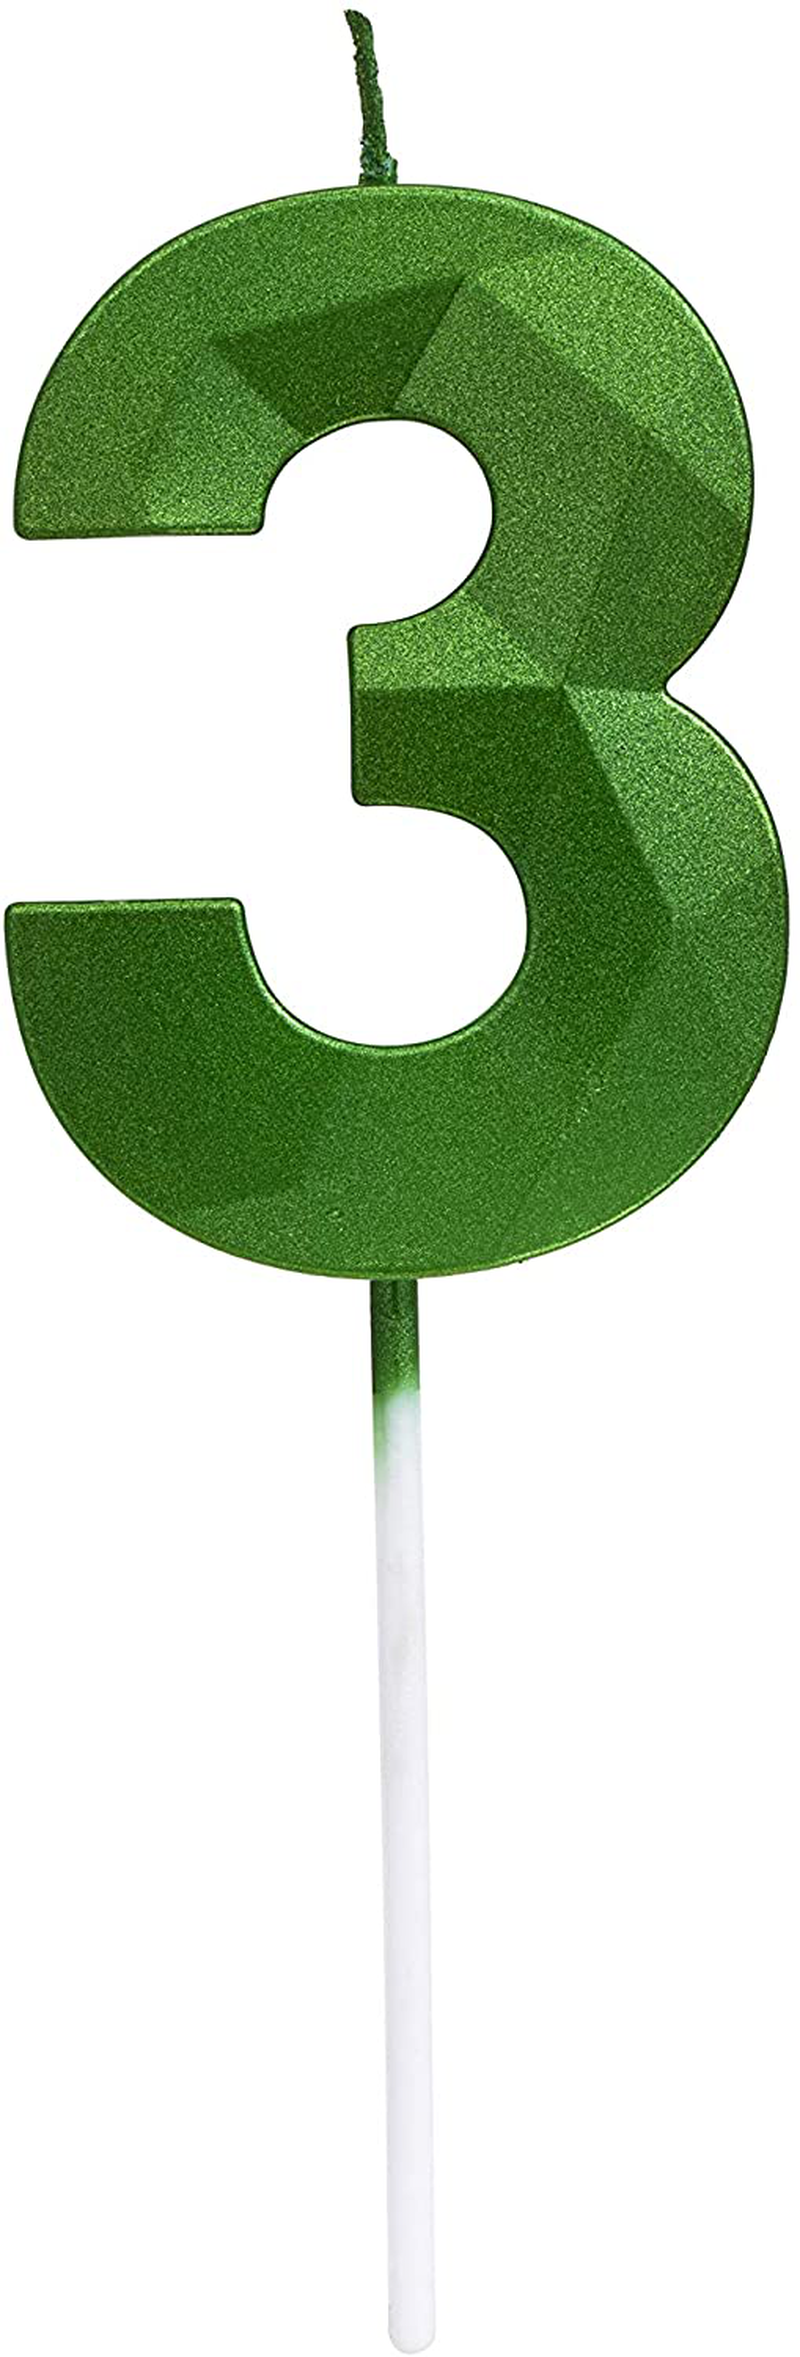 Green Happy Birthday Cake Candles,Wedding Cake Number Candles,3D Design Cake Topper Decoration for Party Kids Adults (Green Number 6) Home & Garden > Decor > Seasonal & Holiday Decorations& Garden > Decor > Seasonal & Holiday Decorations MEIMEI Green number 3 